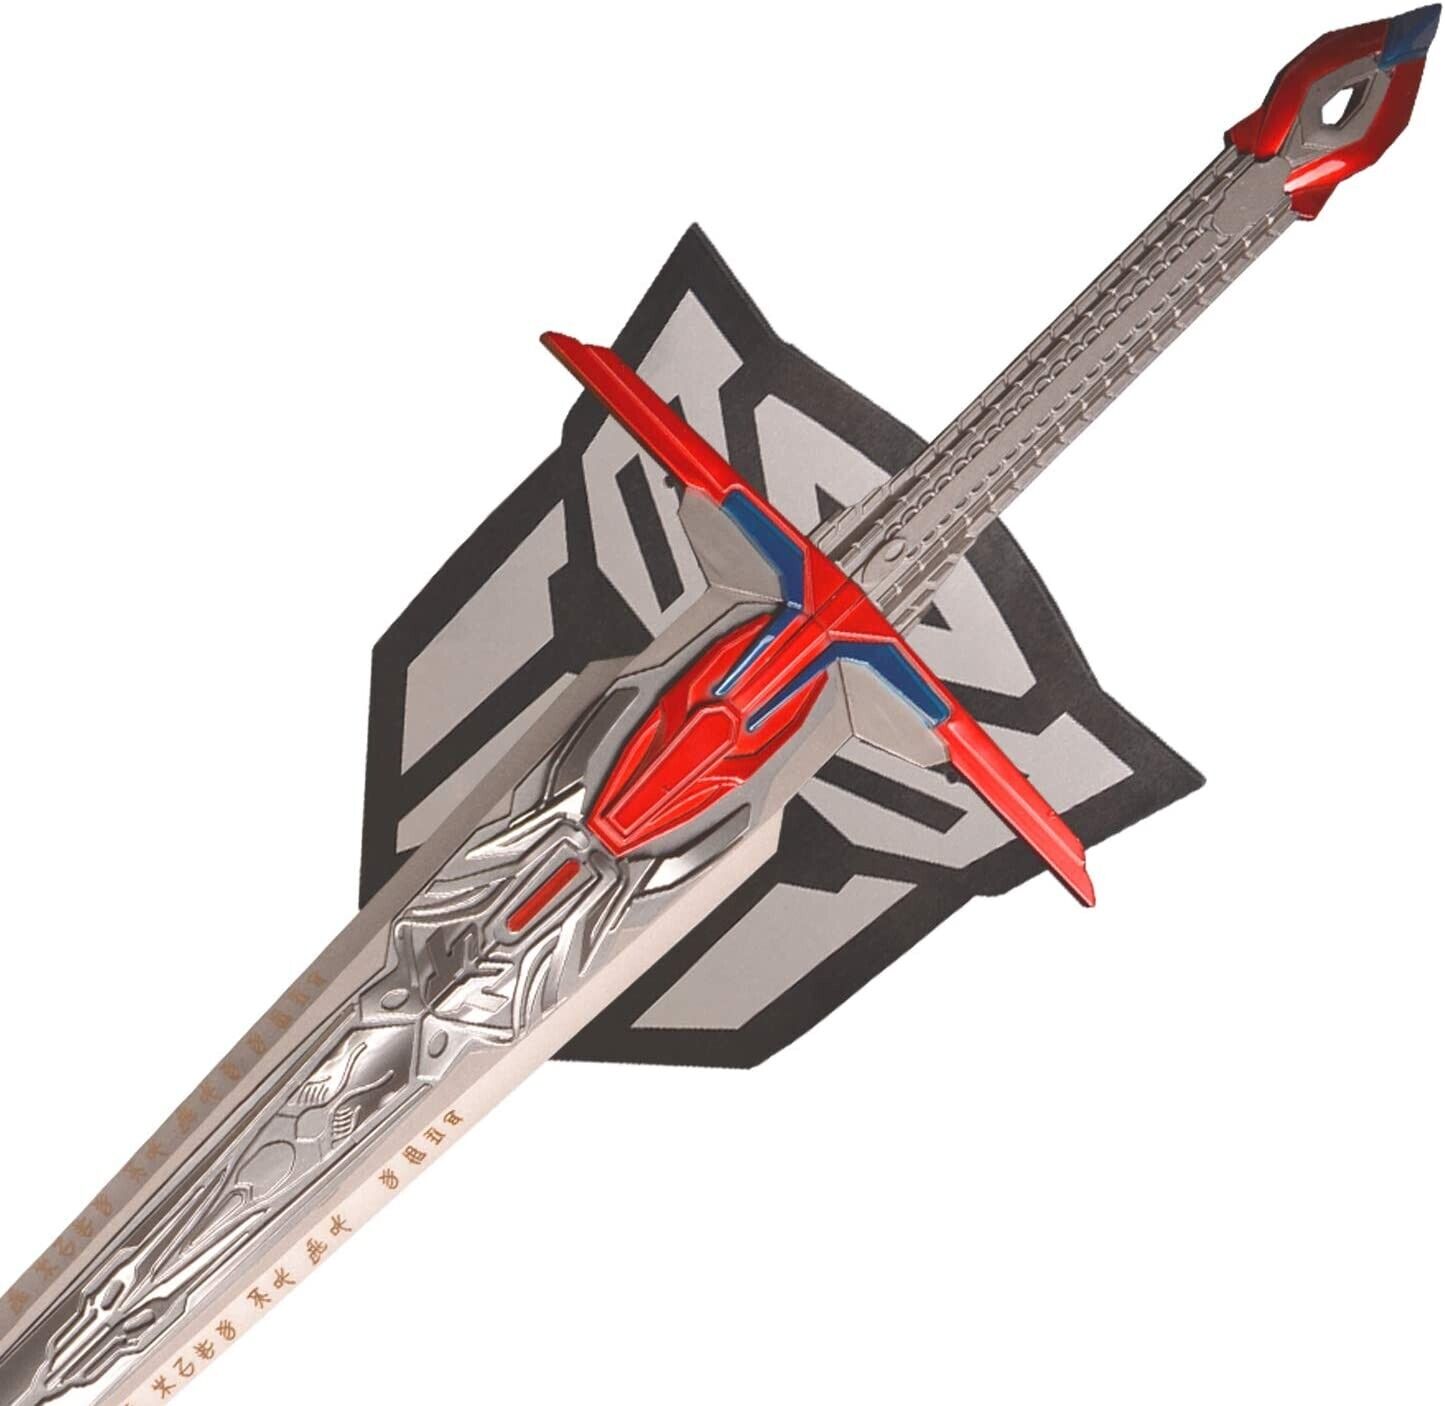 Sword fort ptimus Prime Sword Hand Made Anime Cosplay Sword Stainless Steel